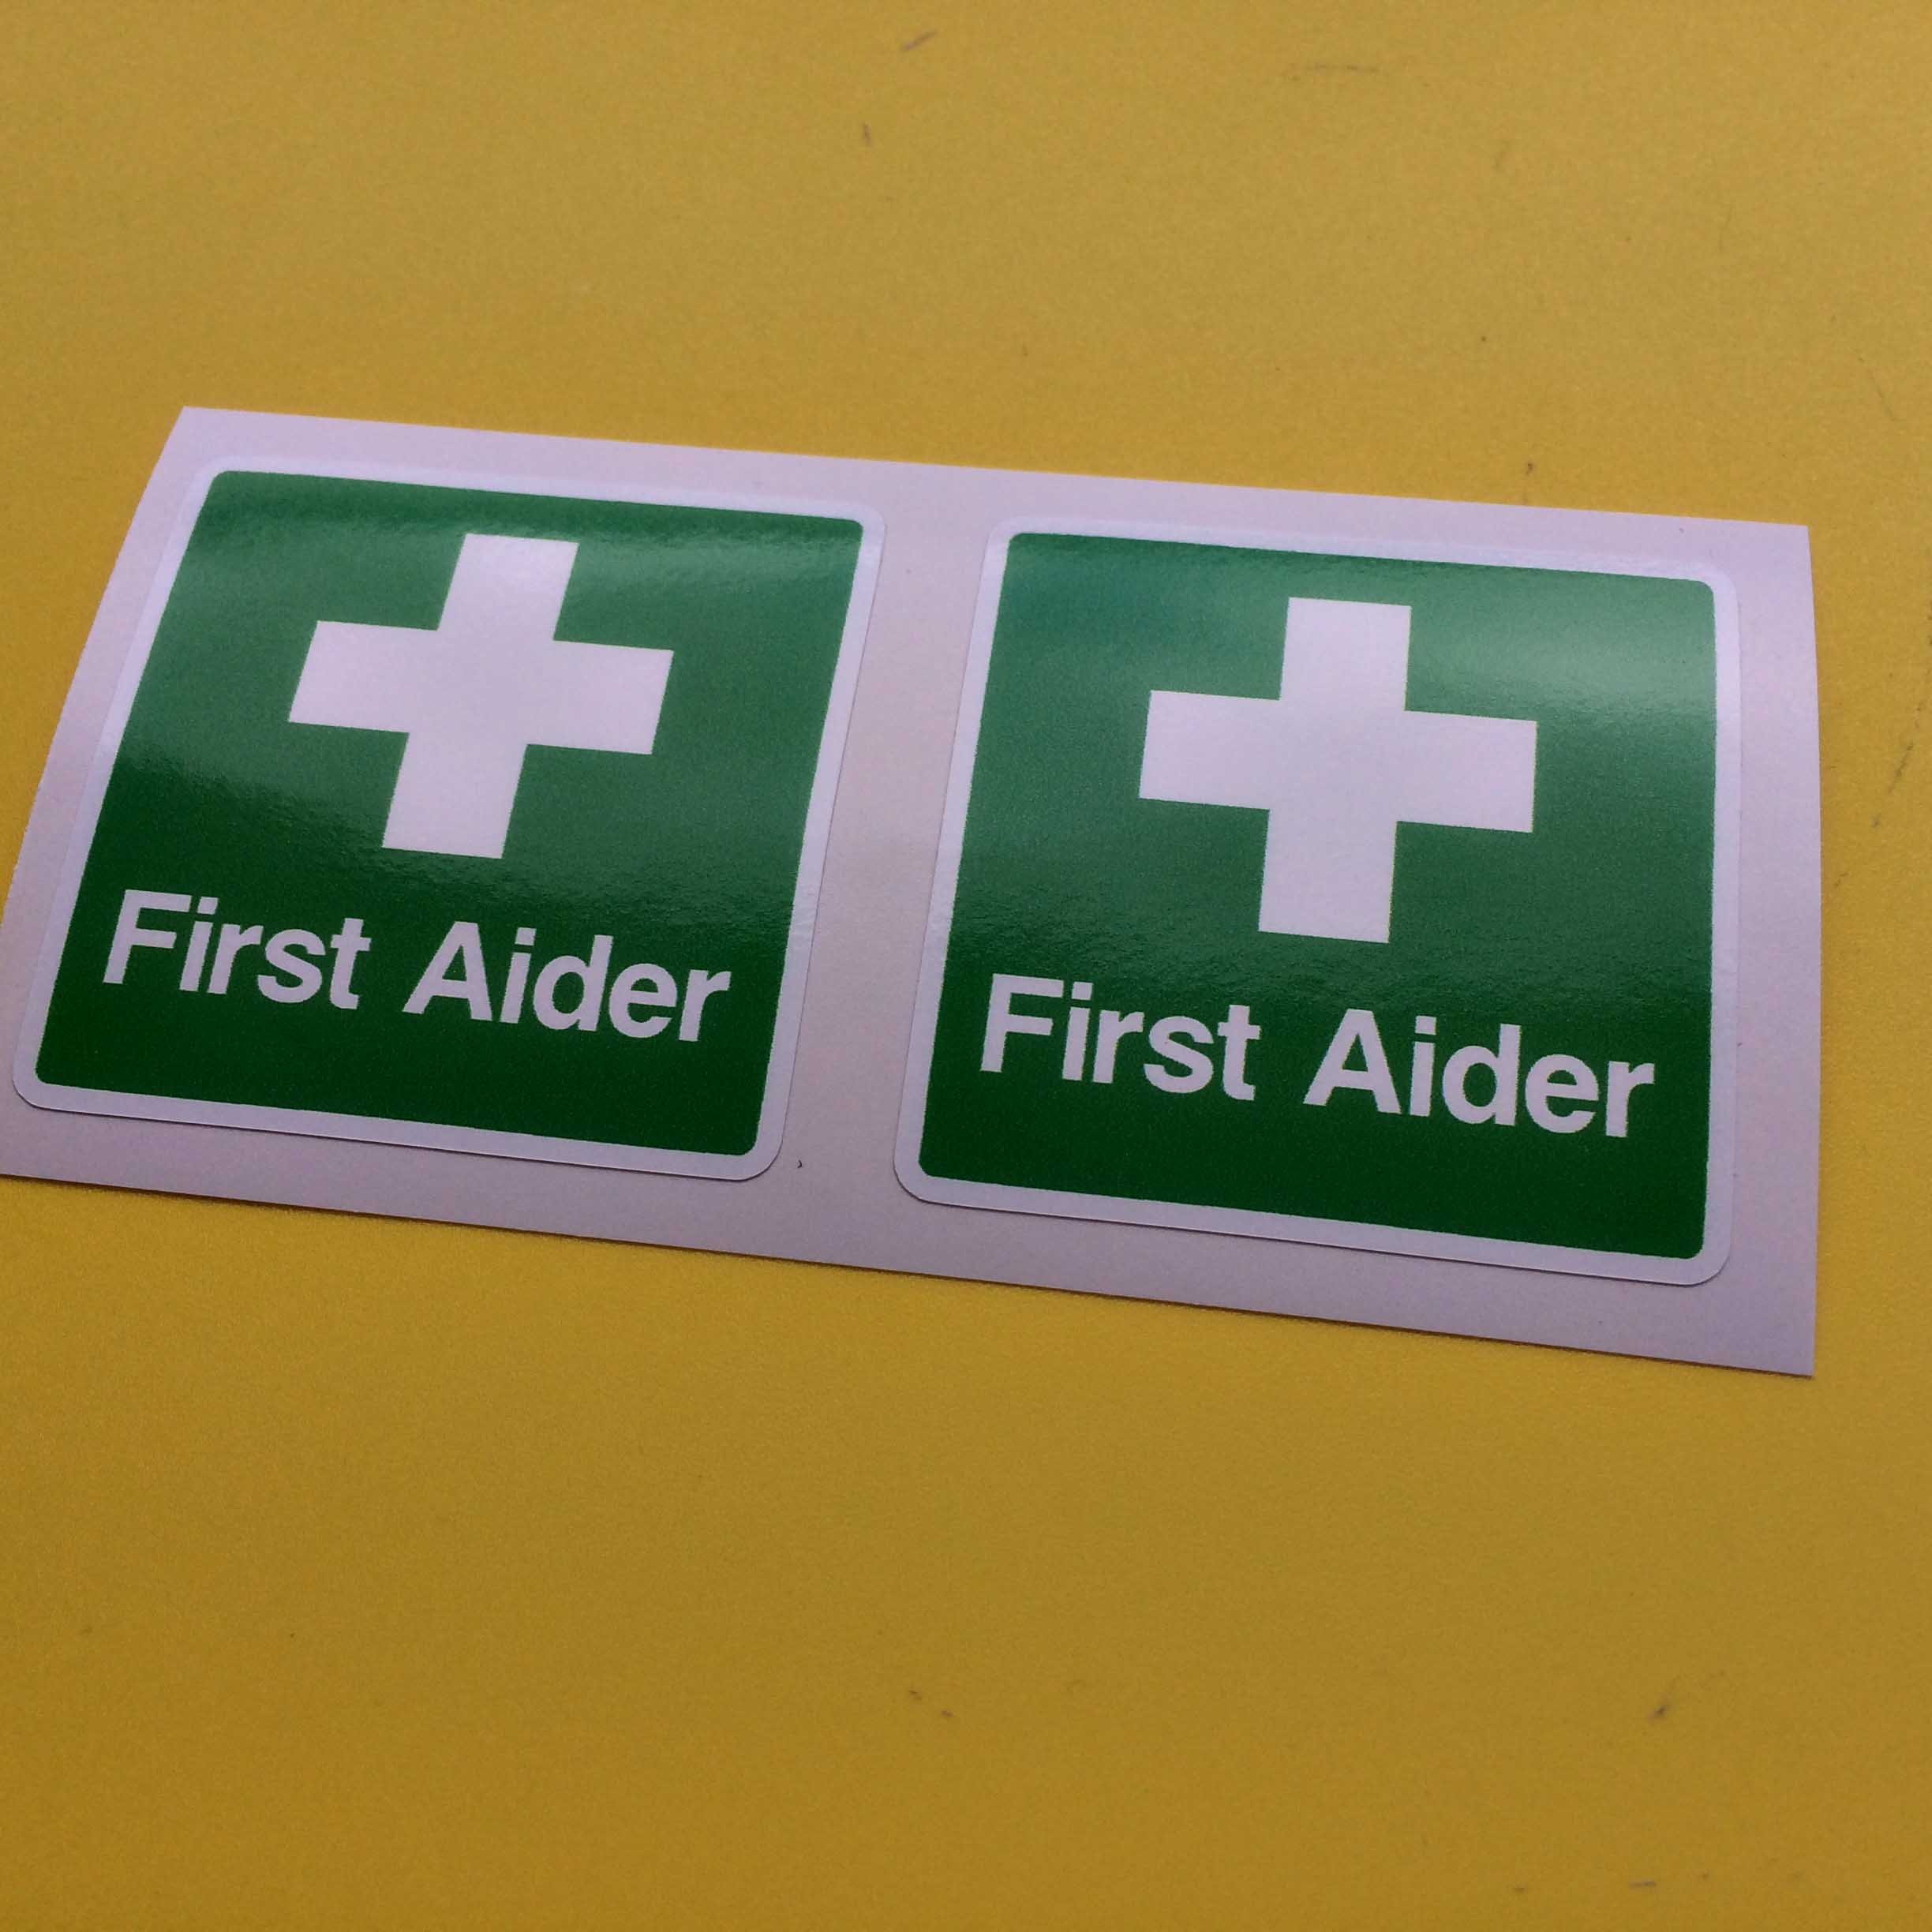 First Aider in white letters and a white cross on a green square.